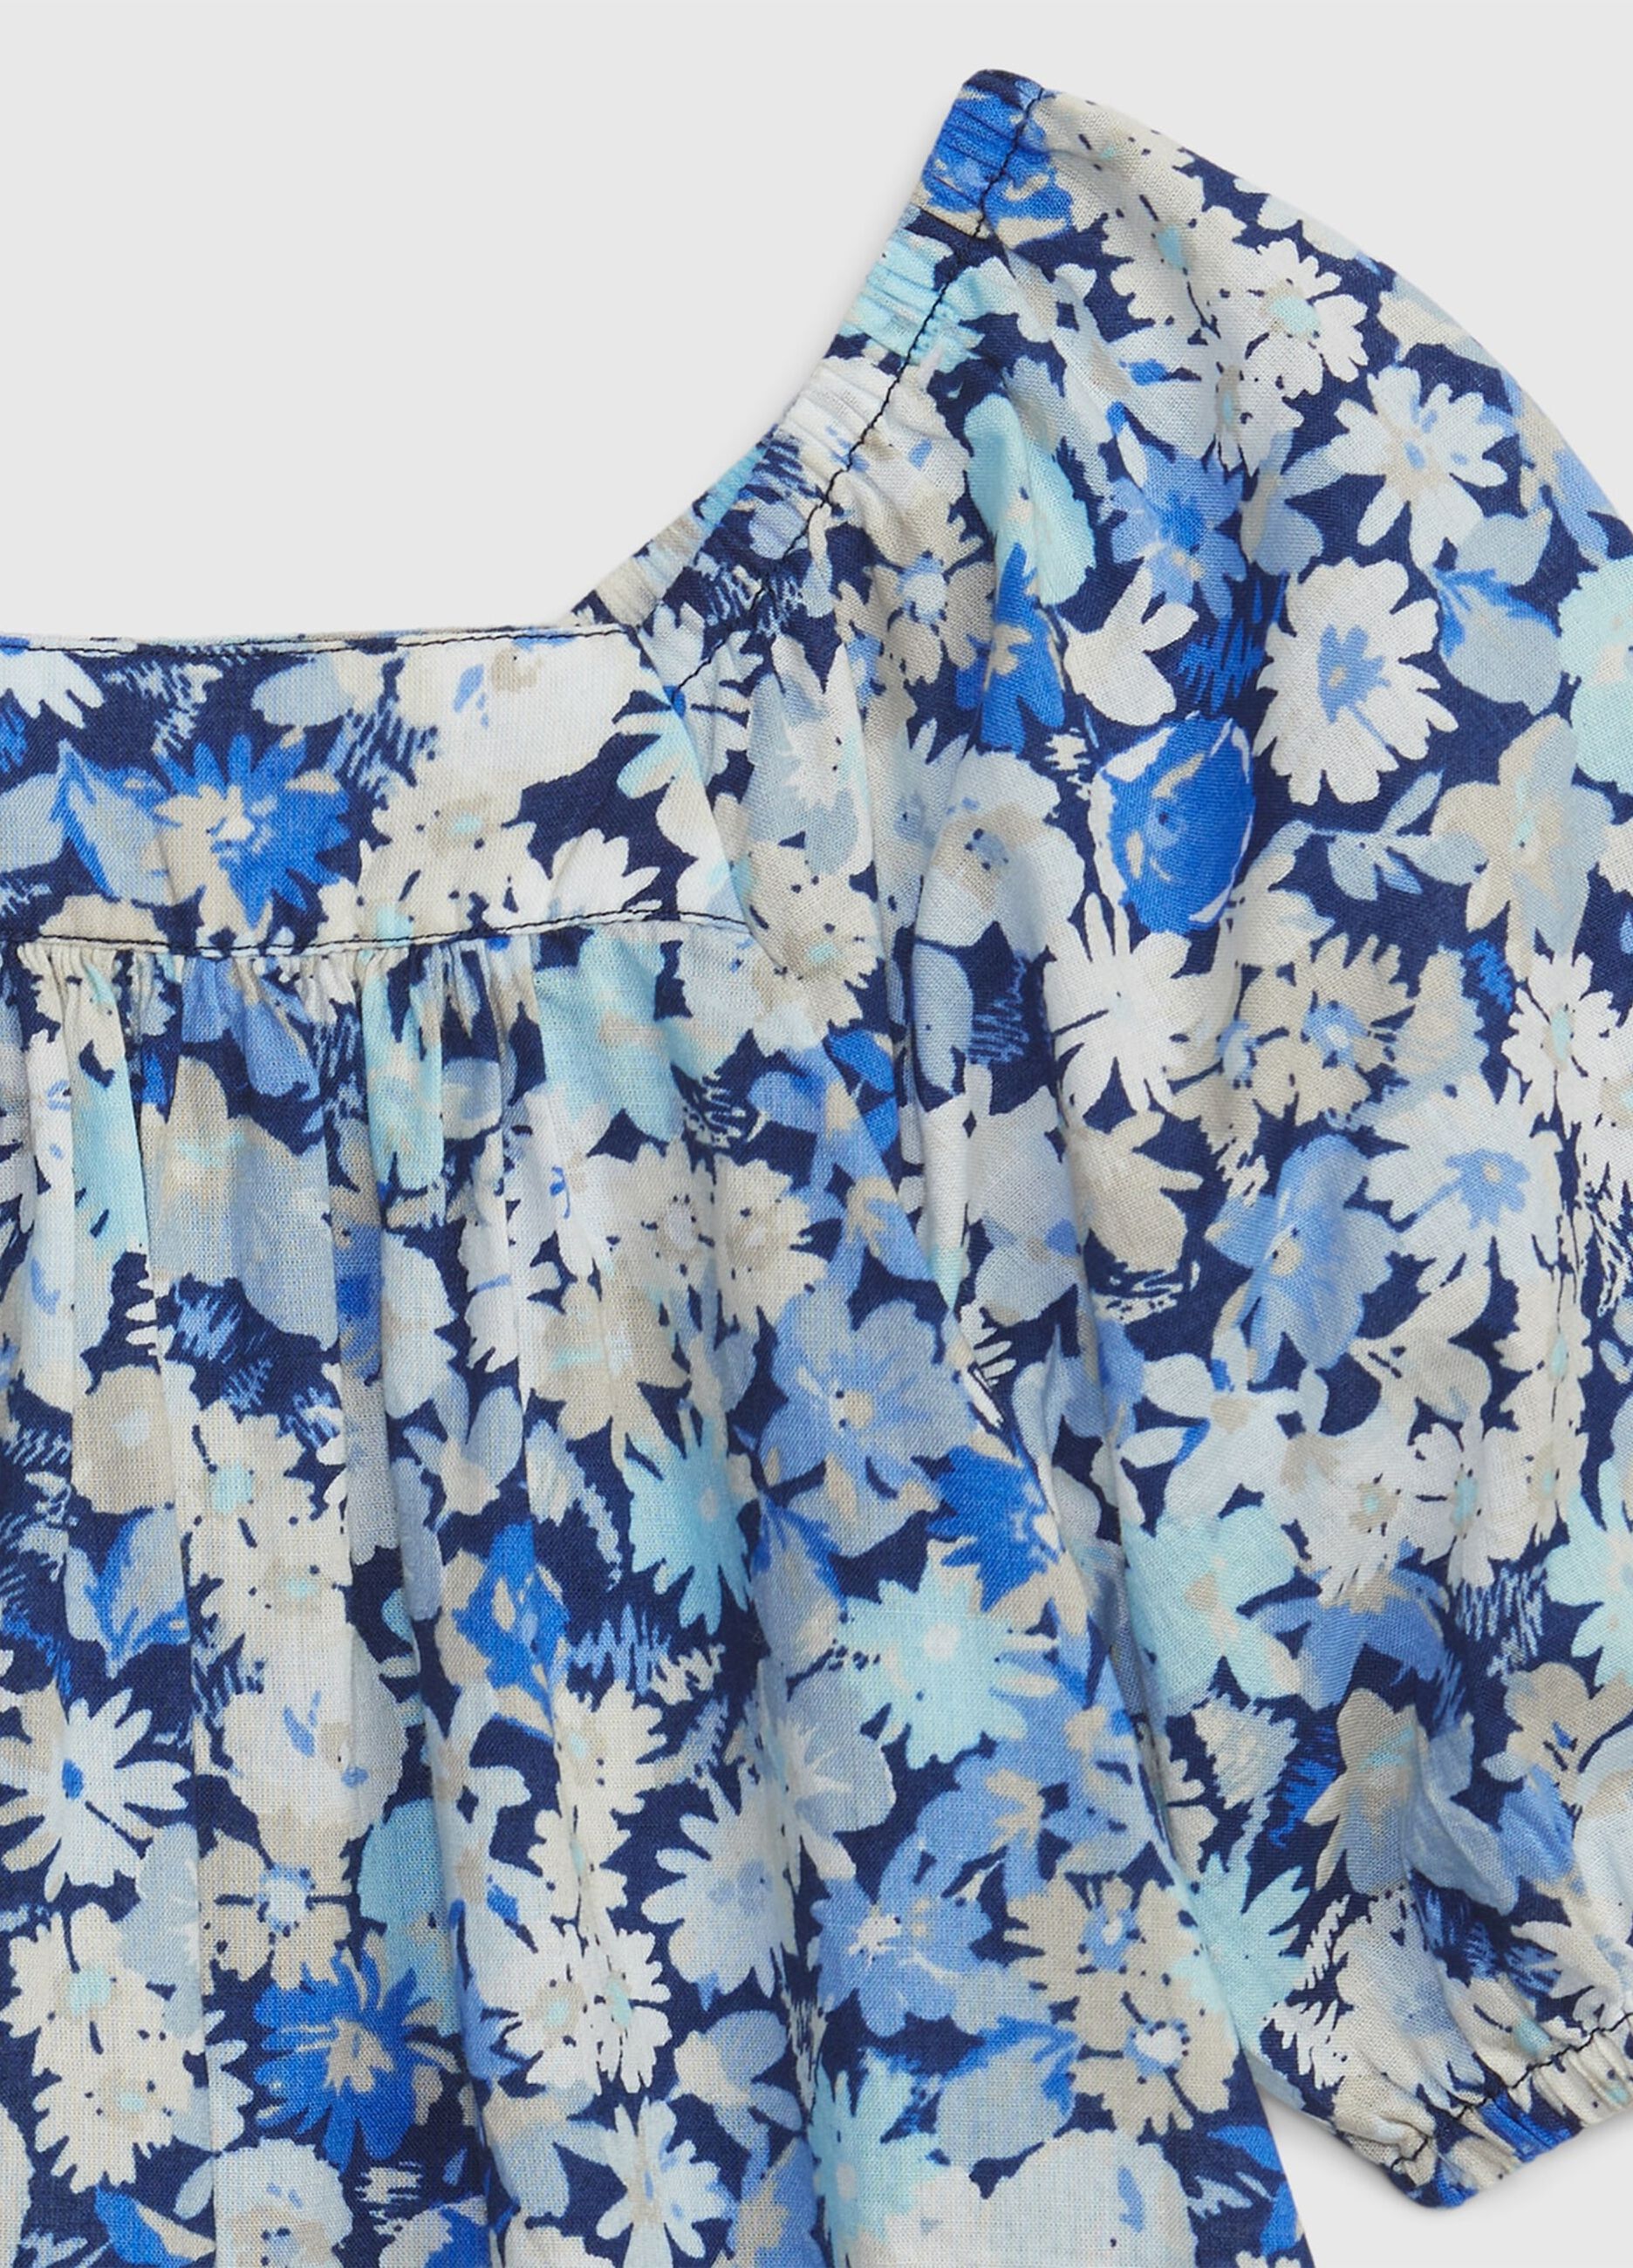 Cotton blouse with floral pattern